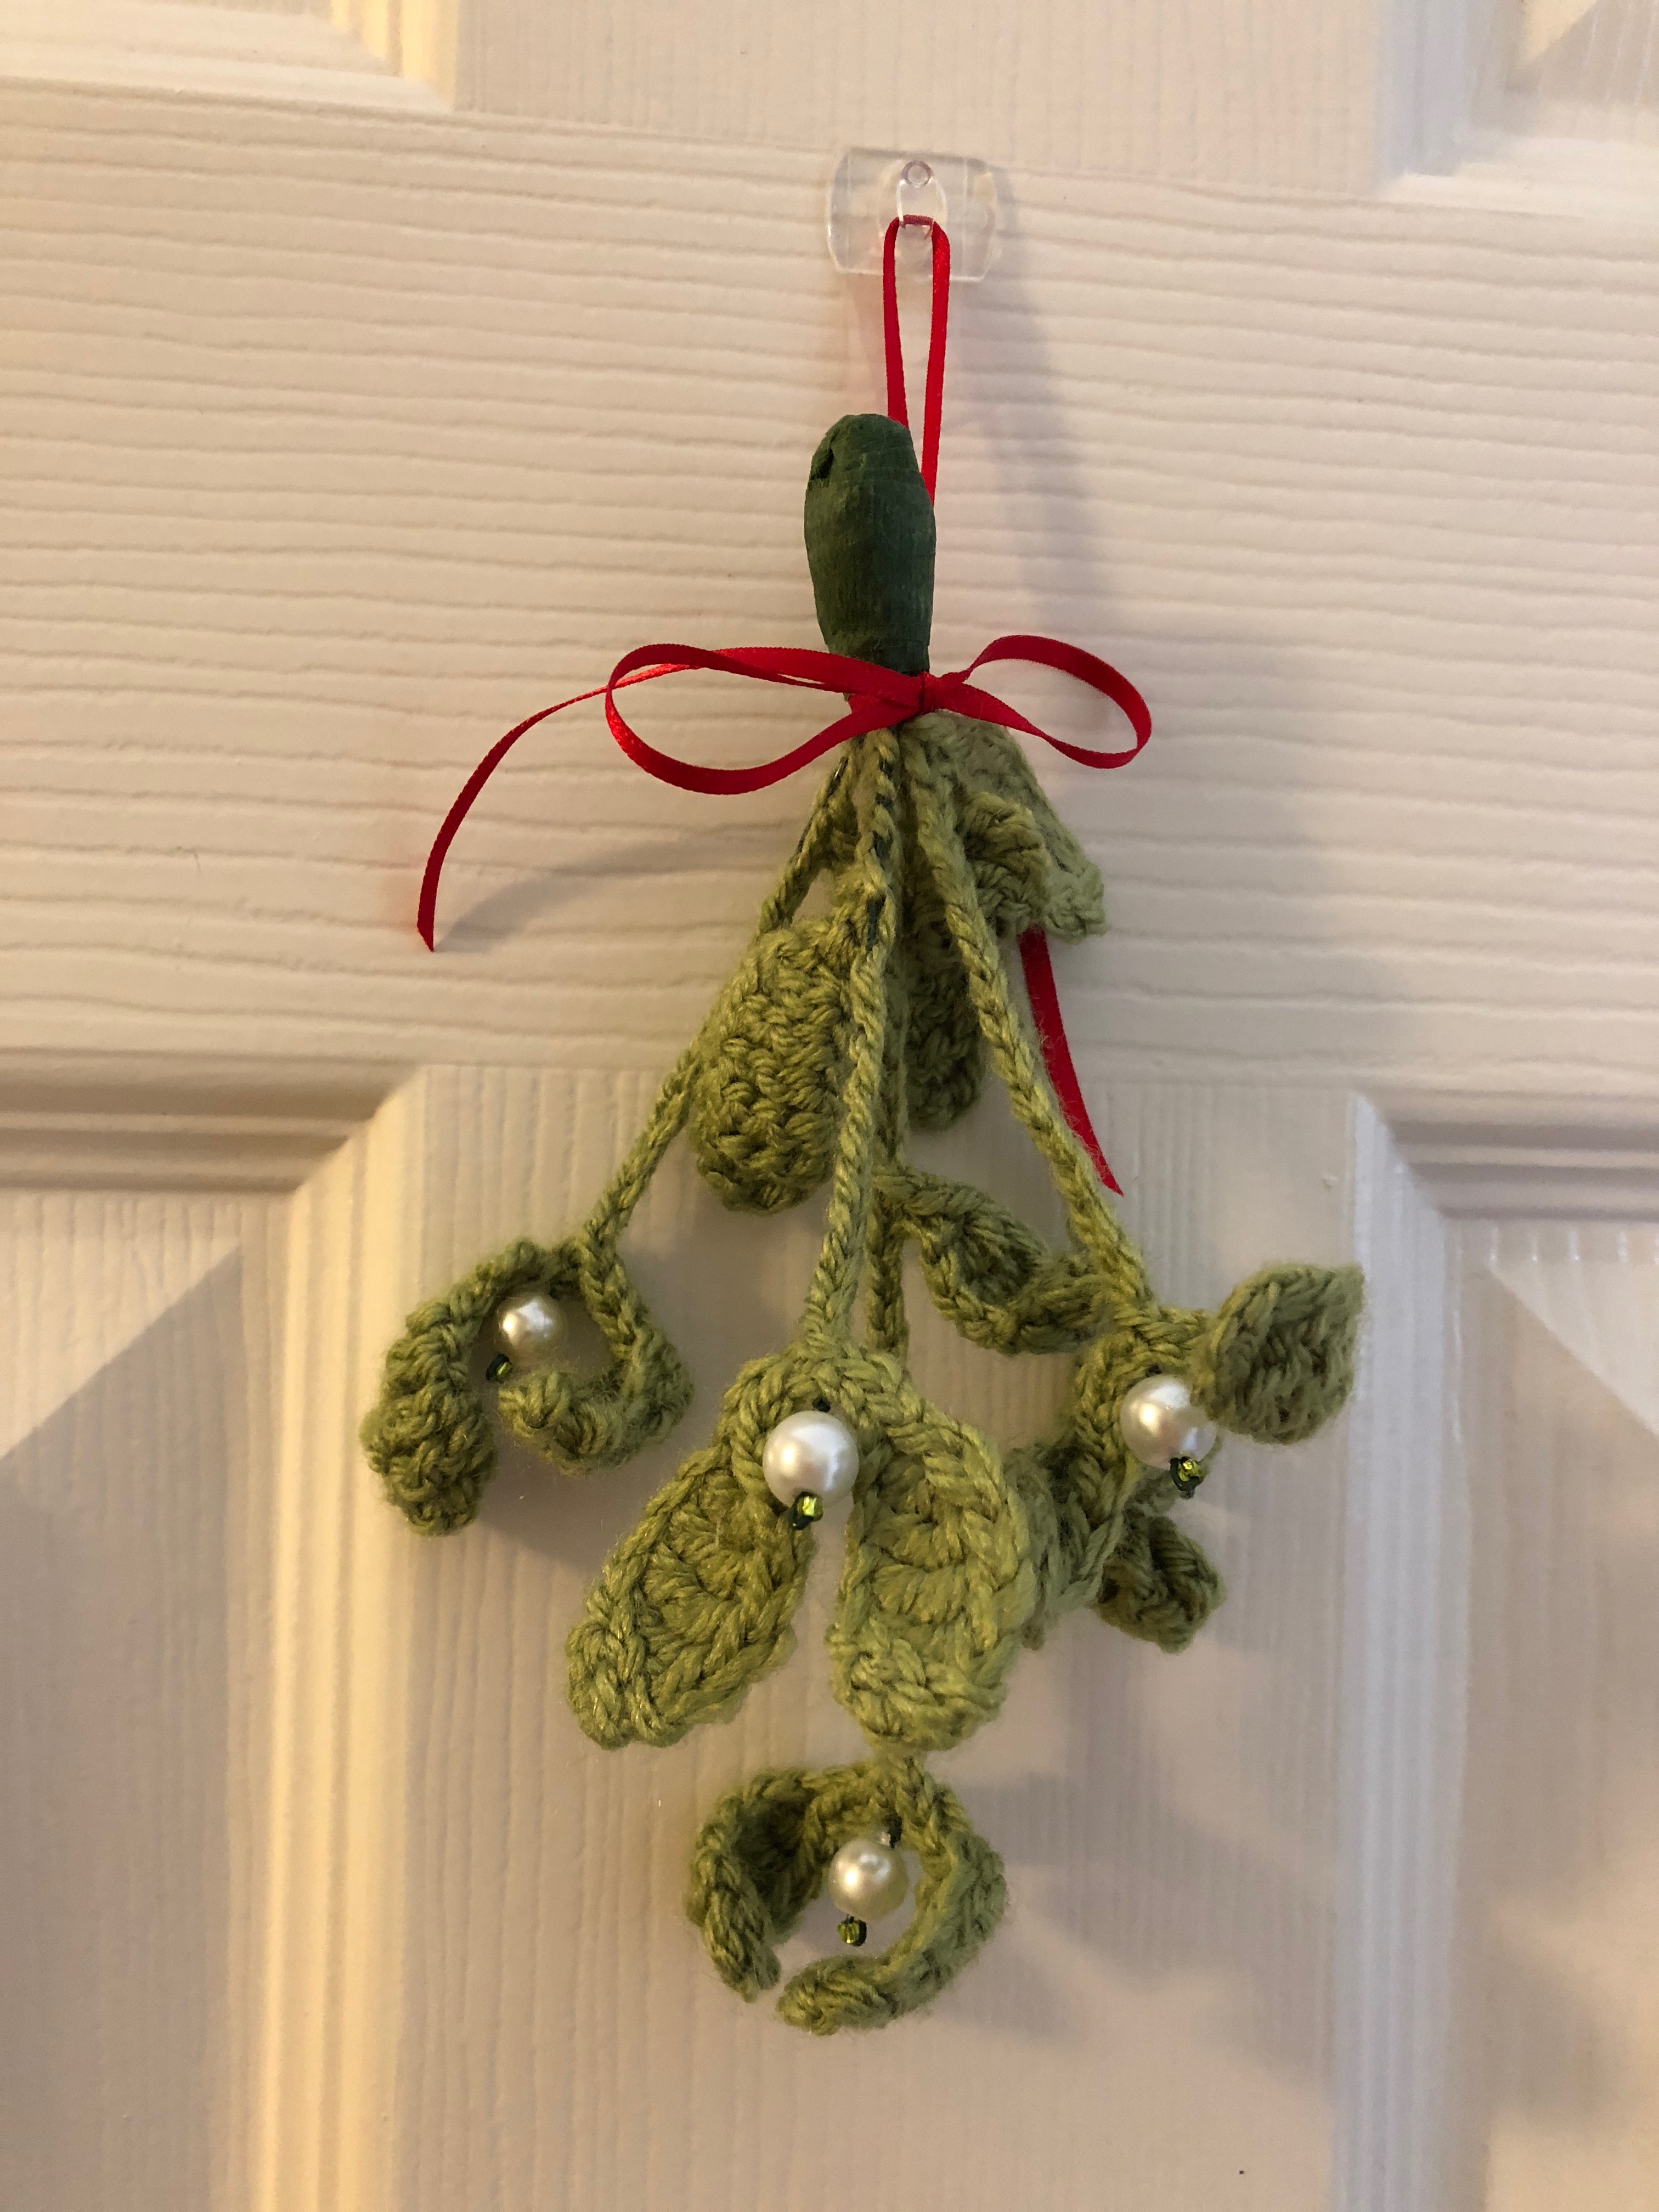 Handmade, crocheted bunch of wired green mistletoe, with white pearl and green glass bead berries and a red ribbon bow.